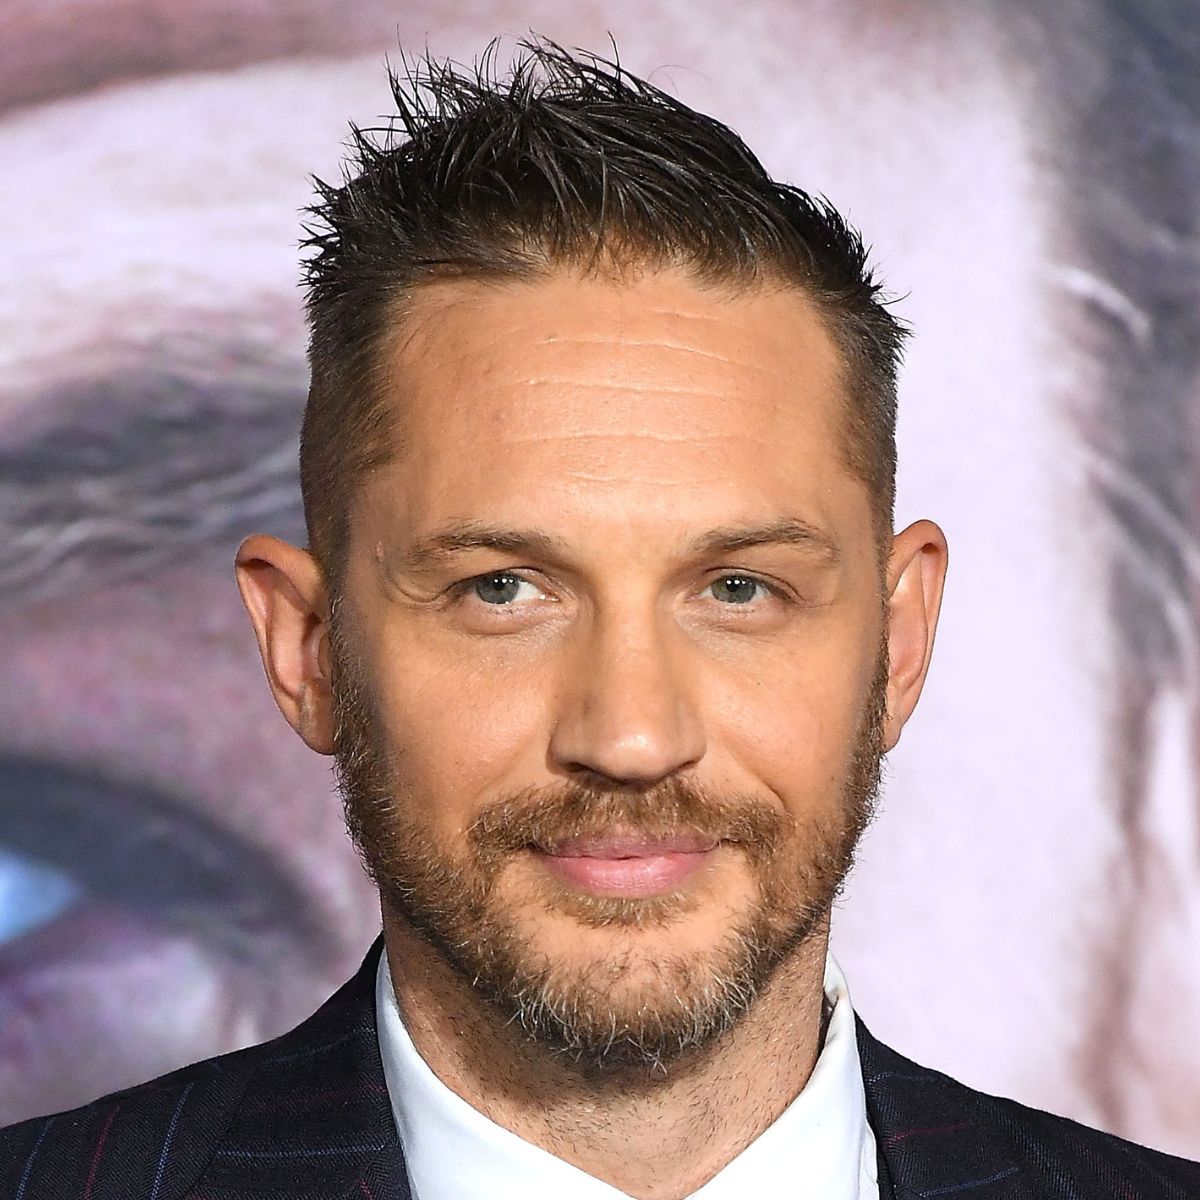 tom-hardy-short-sides-long-on-top-hairstyle-hairstyle-haircut-man-for-himself-ft.jpg